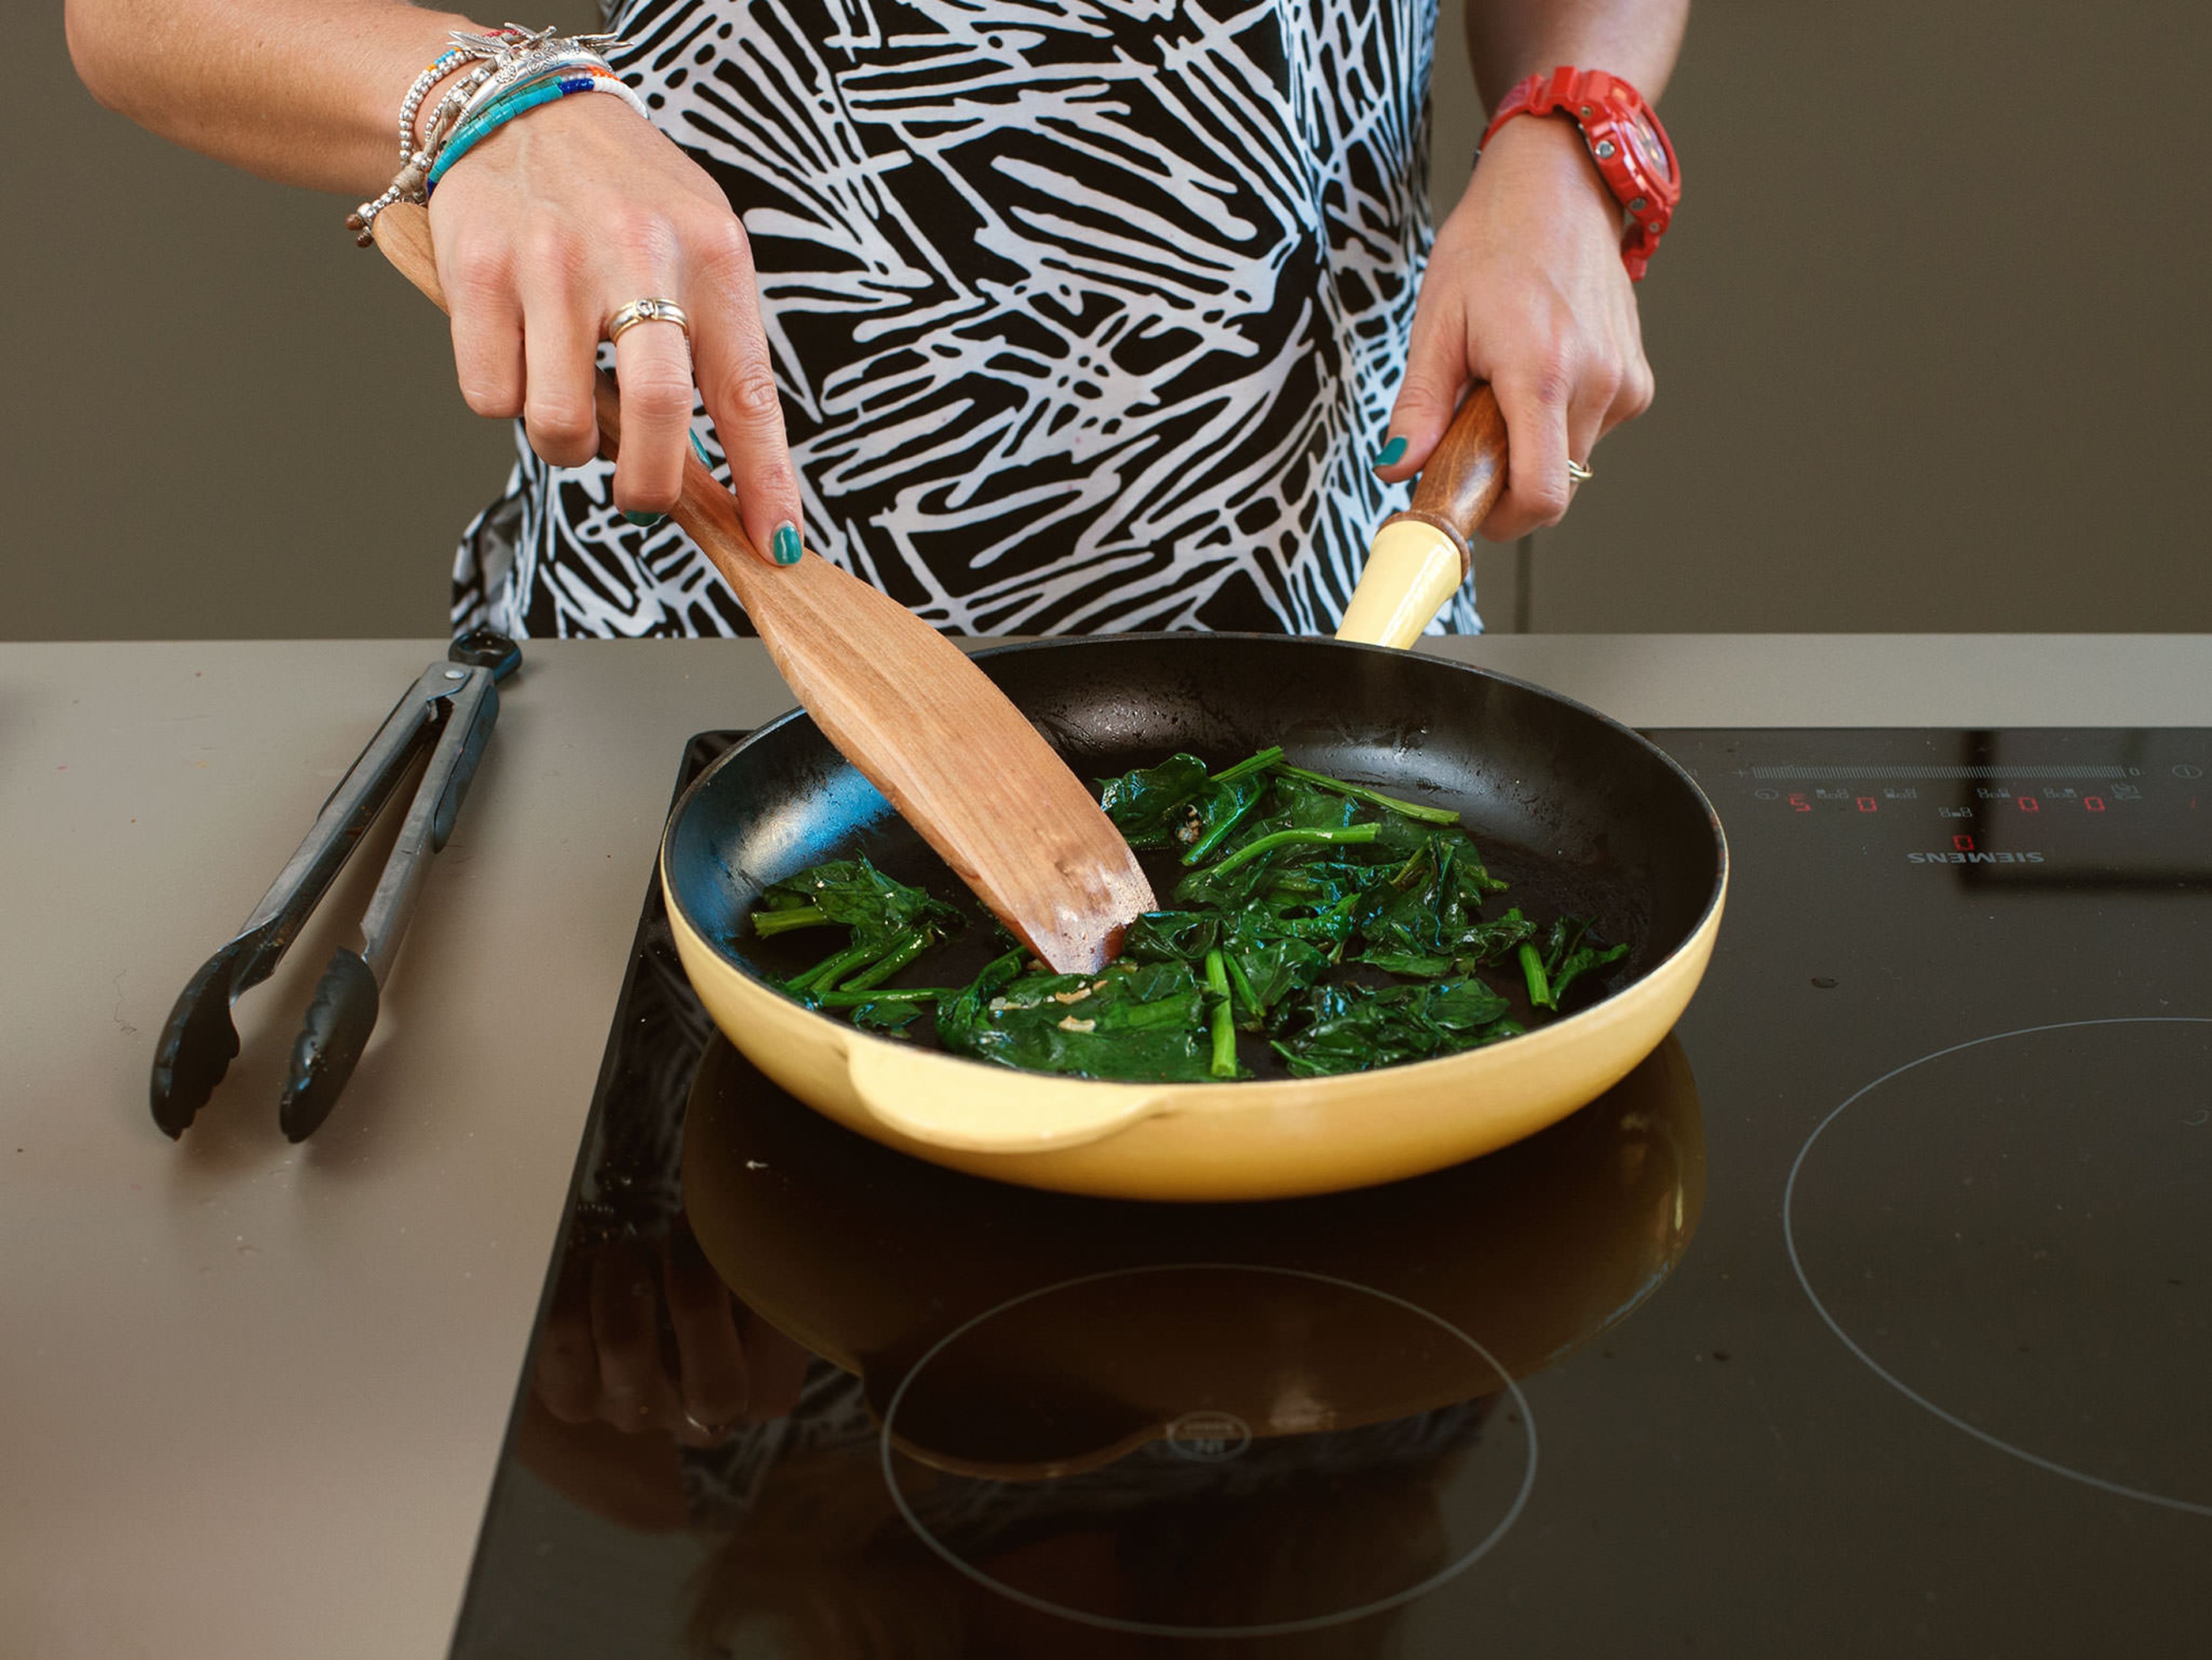 Add some of the coconut oil to pan, sauté garlic, and wilt spinach over medium heat for approx. 1 – 2 min. Drizzle with part of the lemon juice. Add toasted pine nuts to spinach and set aside.